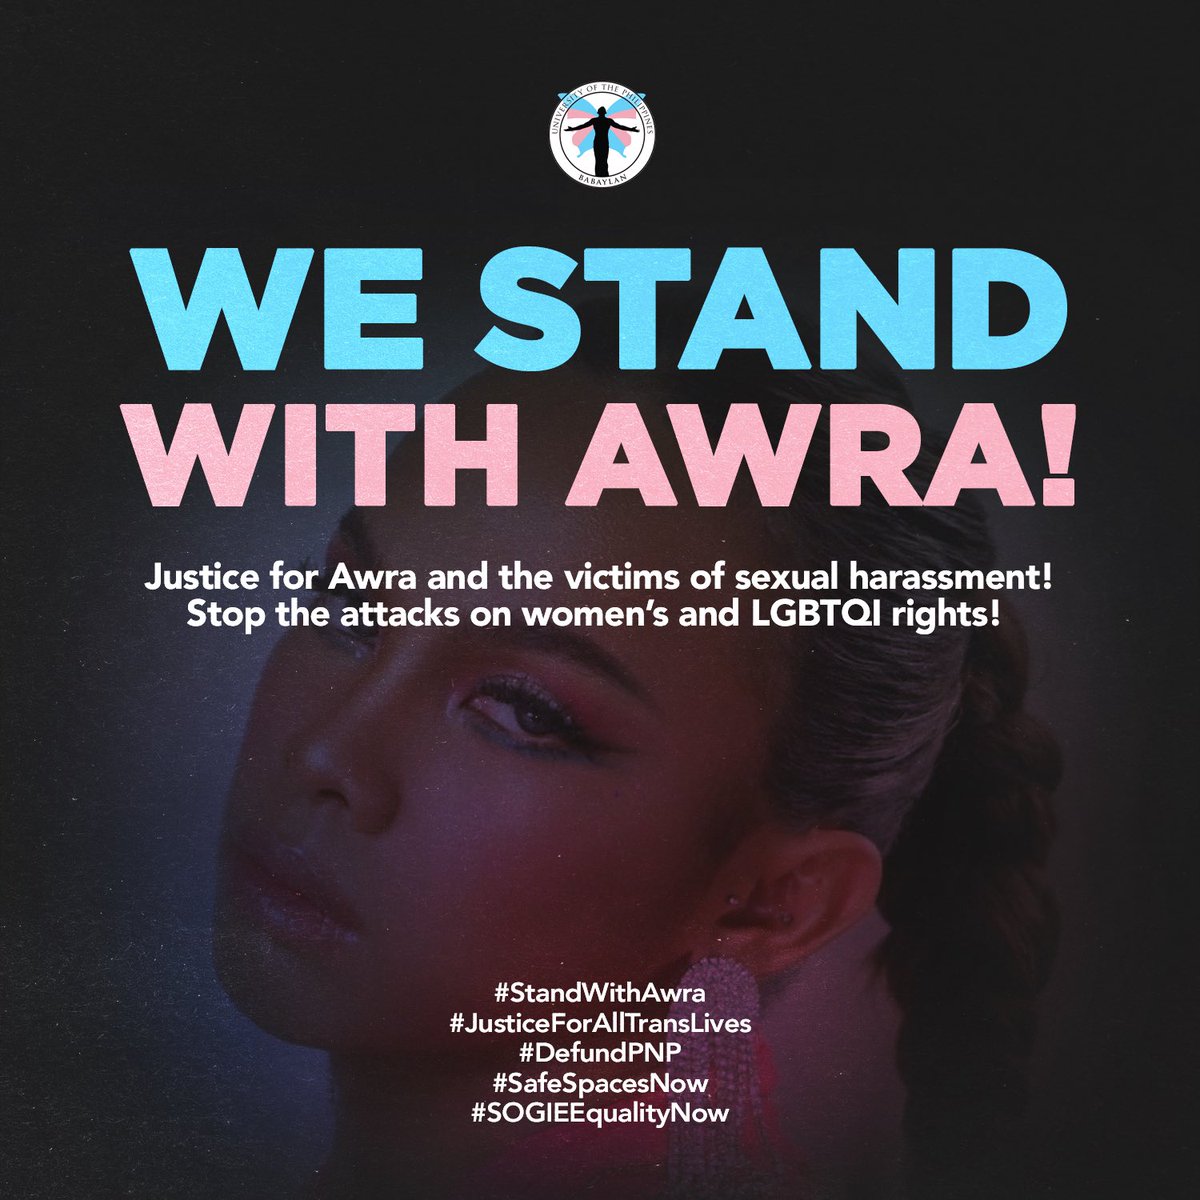 TW: sexual harassment, police violence, transphobia WE STAND WITH AWRA! Justice for Awra and the victims of sexual harassment! Stop the attacks on women’s and LGBTQI rights! #StandWithAwra #JusticeForAllTransLives #DefundPNP #SafeSpacesNow #SOGIEEqualityNow